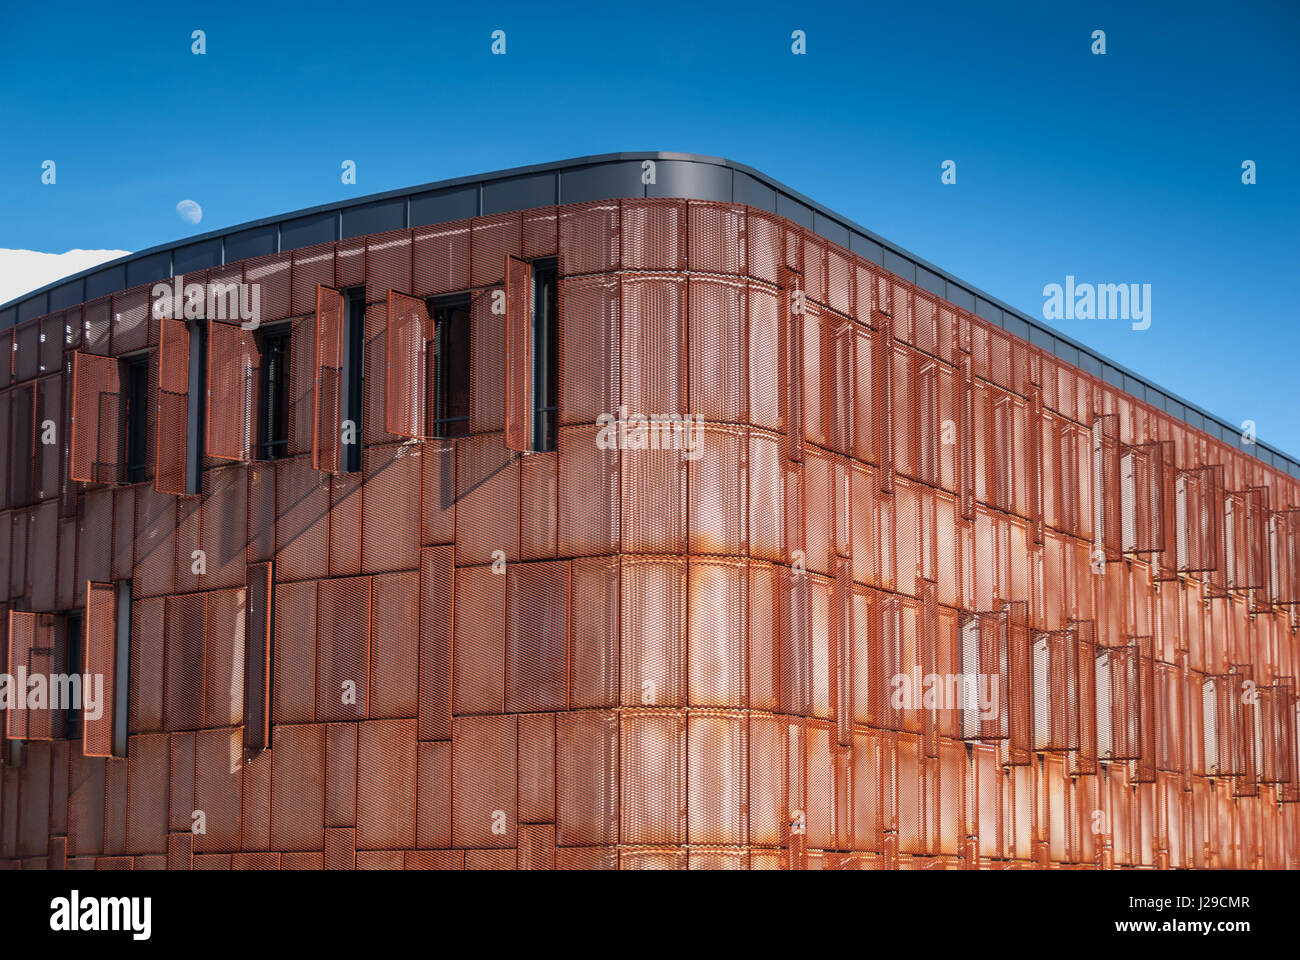 Modern facade building with rusted steel expanded metal mesh panels with  open window shutters and deep blue sky in the background Stock Photo - Alamy